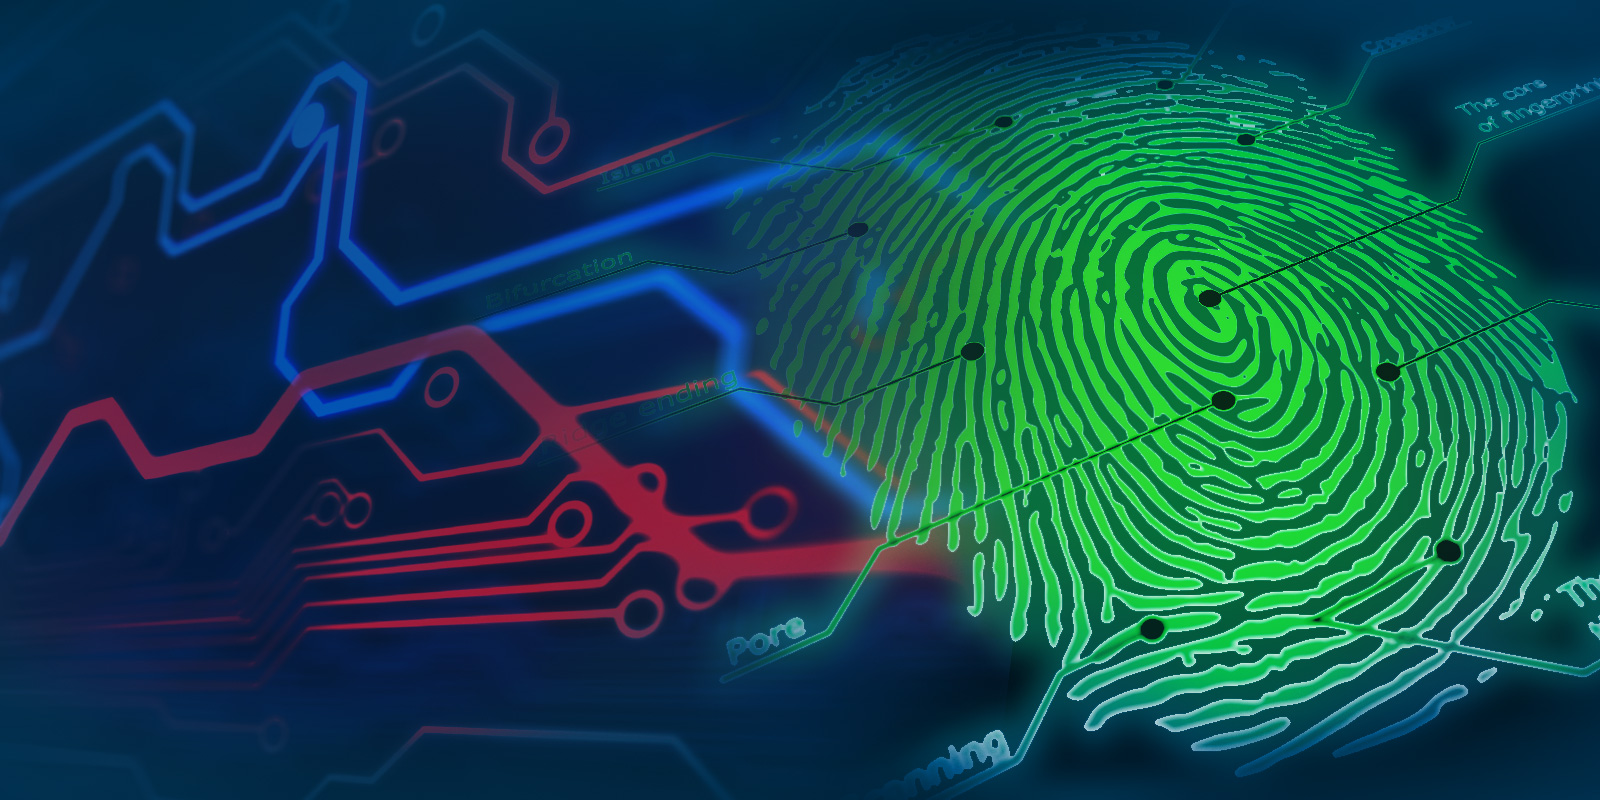 Appellate Court Limits Who May Sue Under Biometric Information Privacy Act